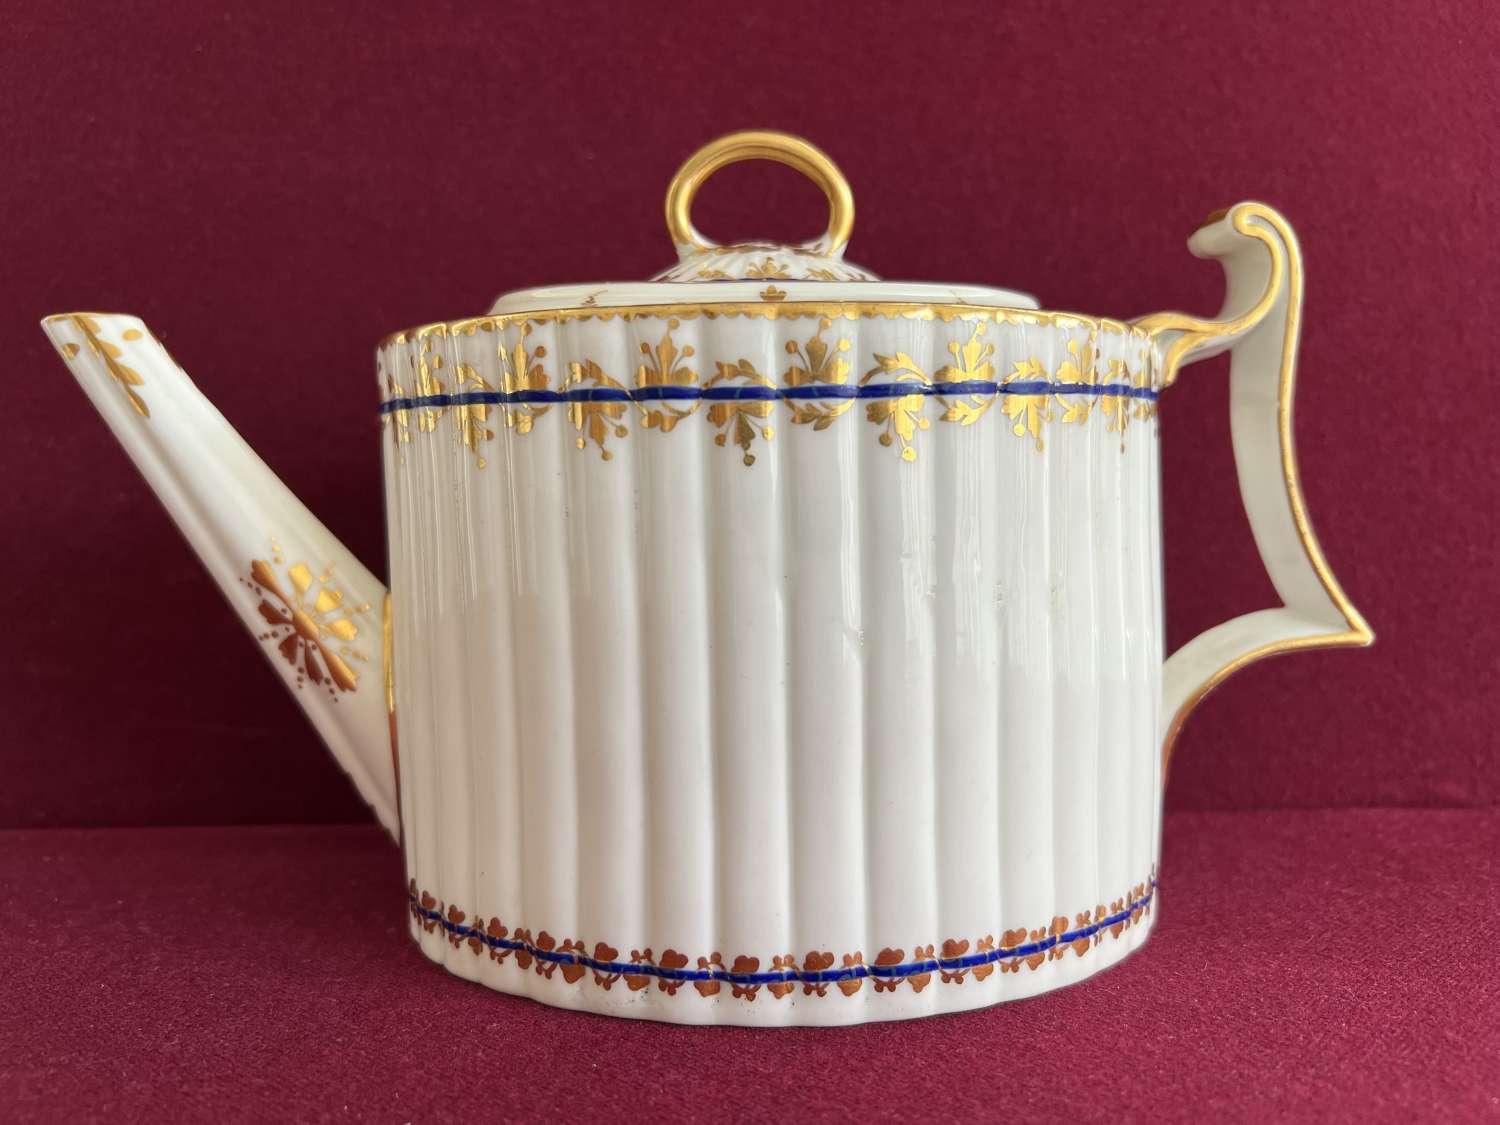 A fine Derby porcelain teapot decorated in pattern 110 c.1785-1790